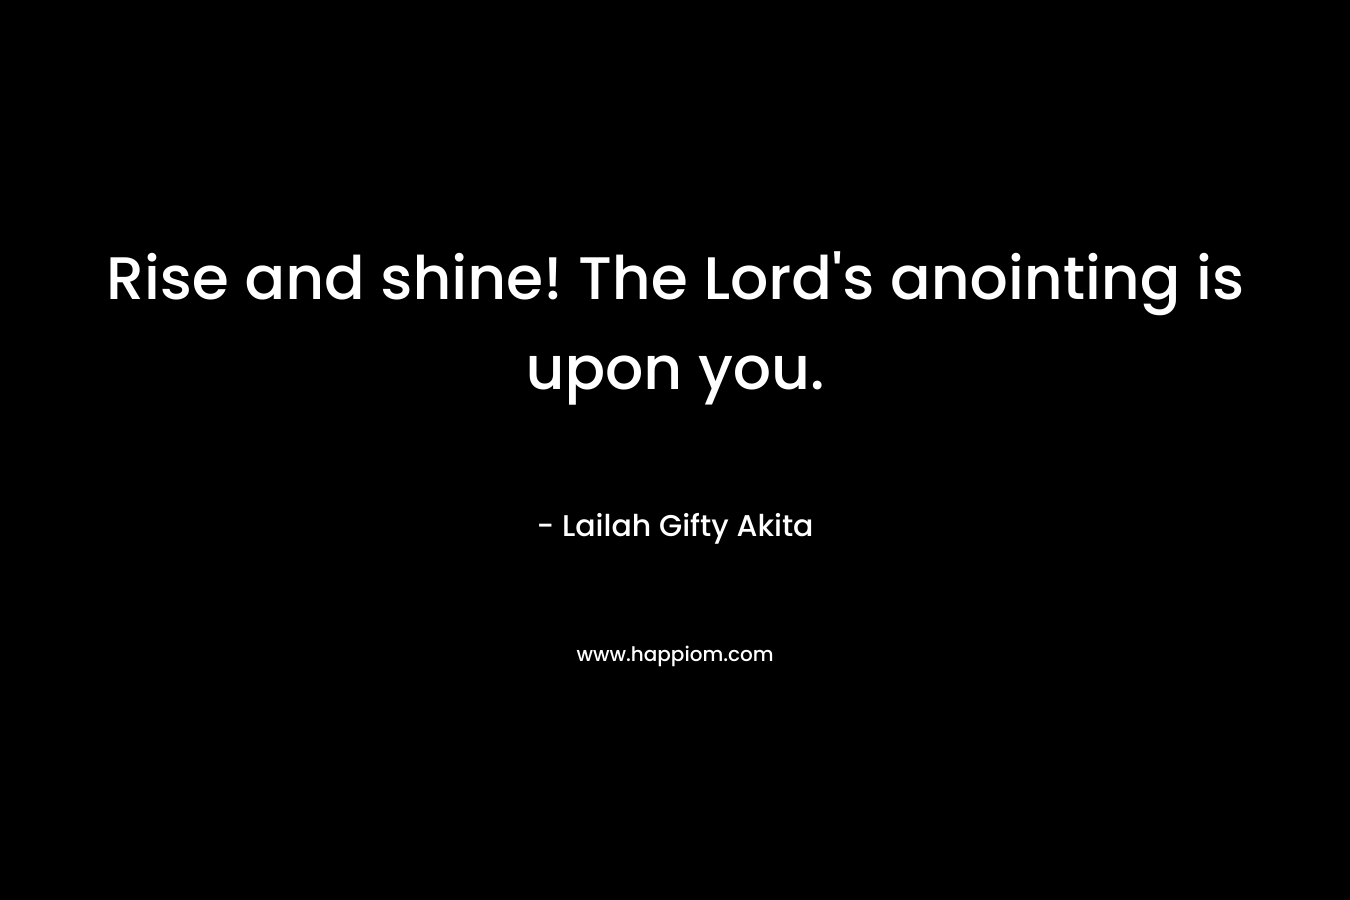 Rise and shine! The Lord's anointing is upon you.